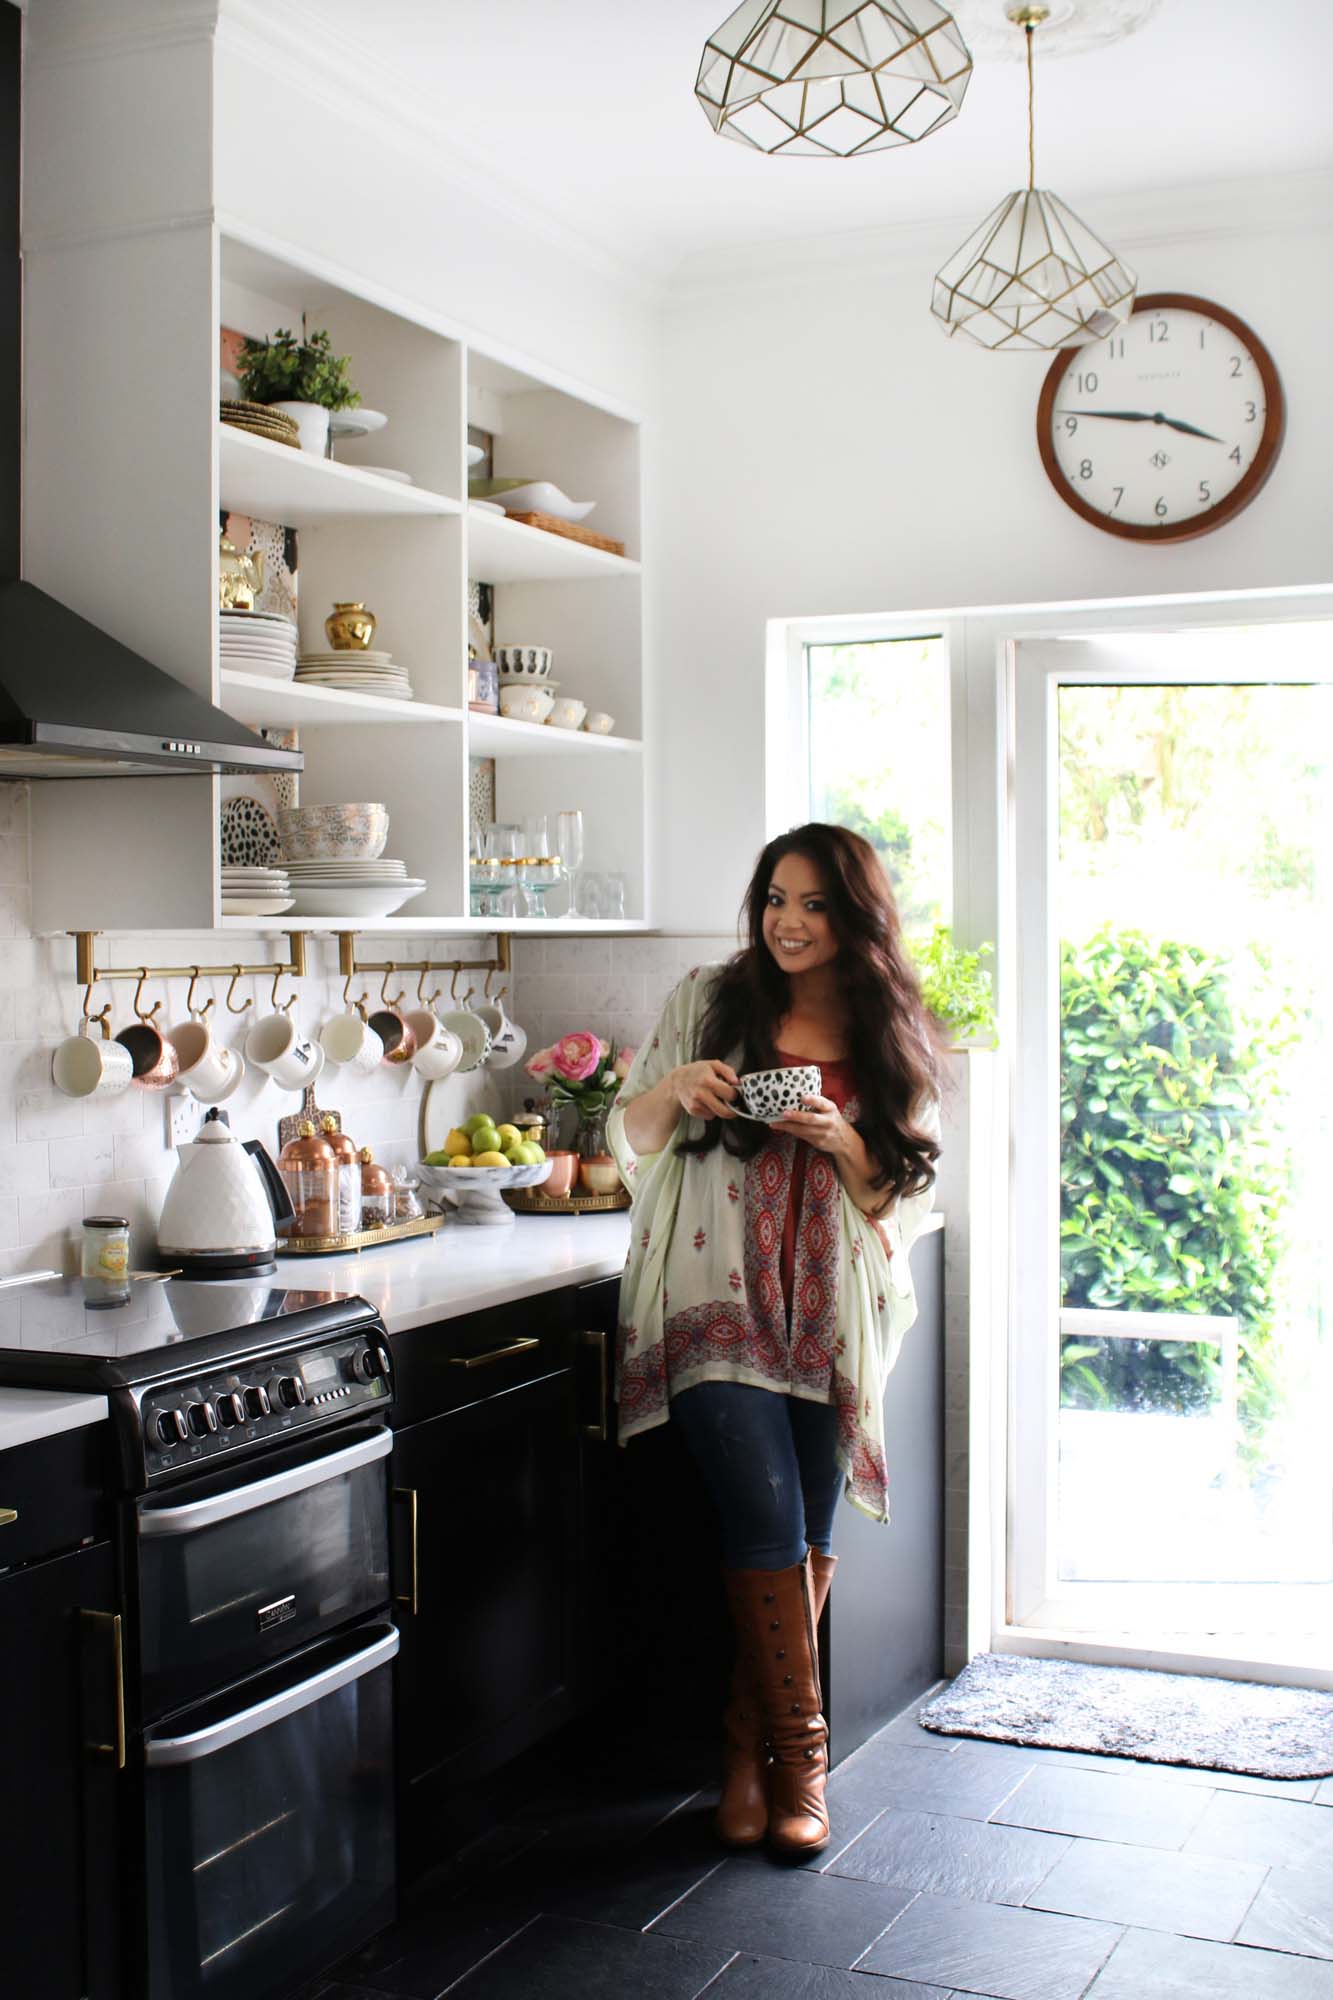 Kimberly from Swoon Worthy in her kitchen